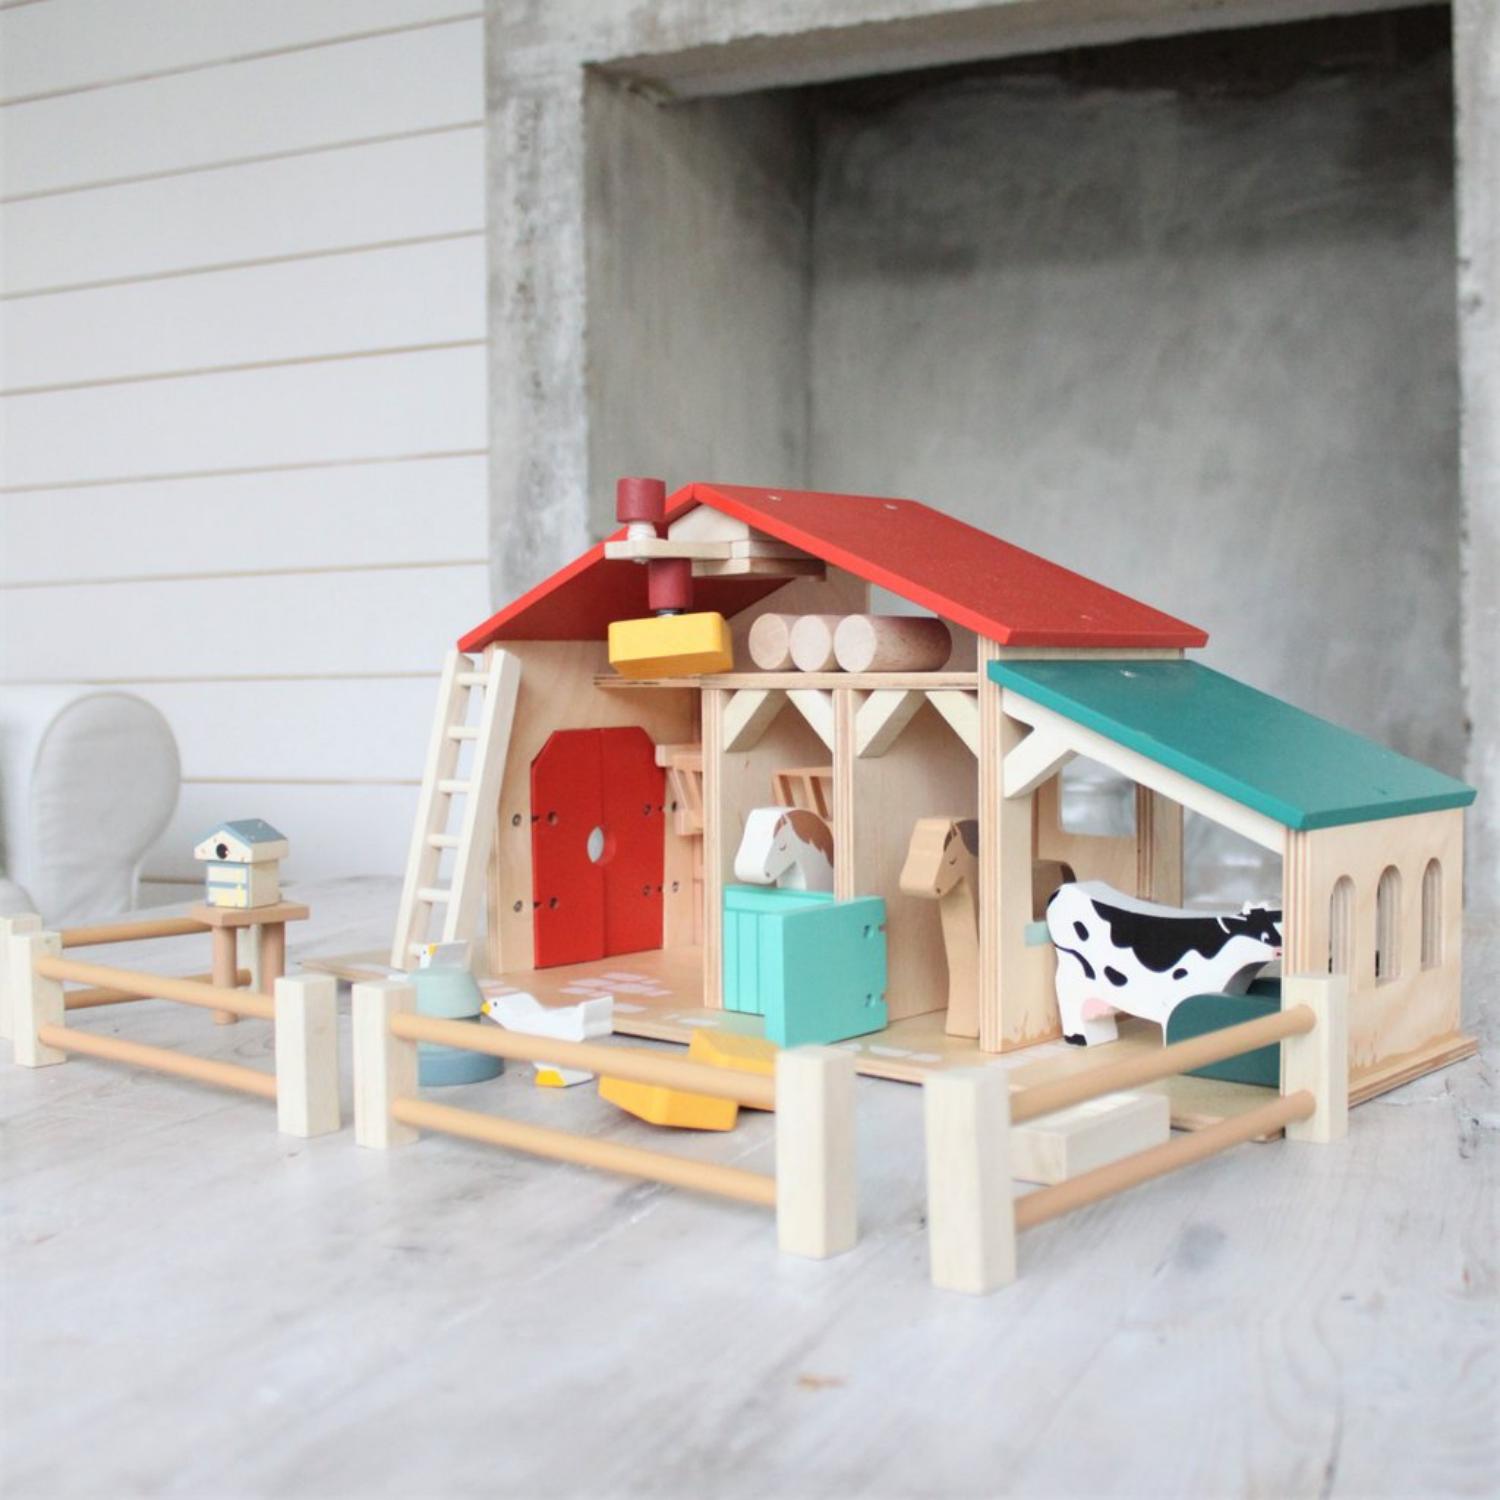 Tender Leaf Toys Wooden Farm | Wooden Toy Play Set For Kids | Lifestyle – Farm Play Set on Table | BeoVERDE.ie